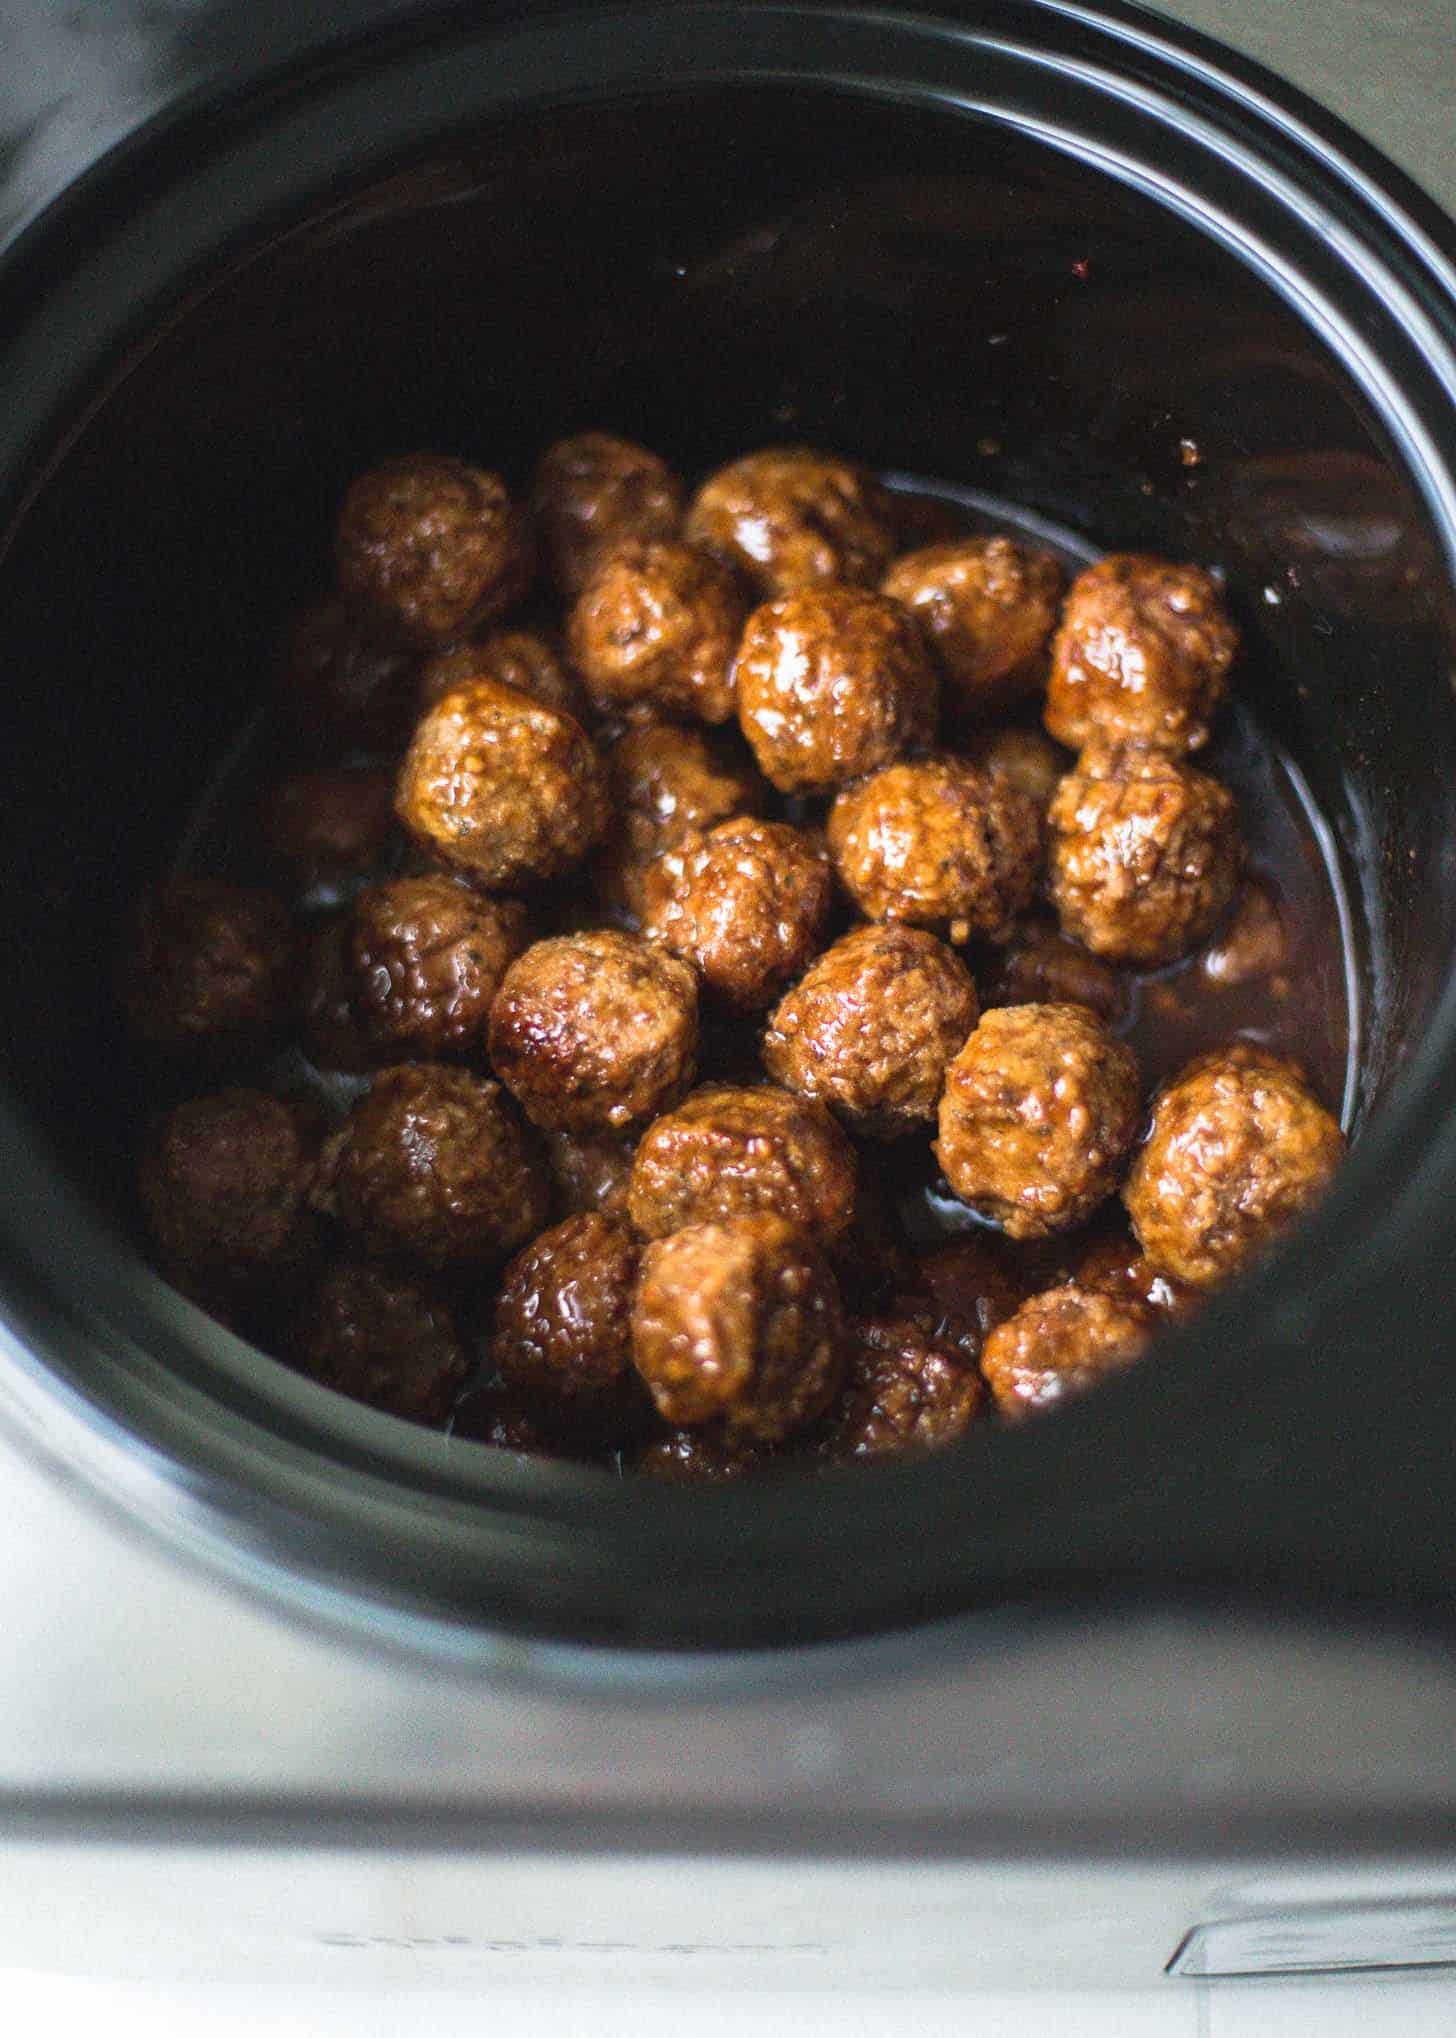 Meatballs in a slow cooker